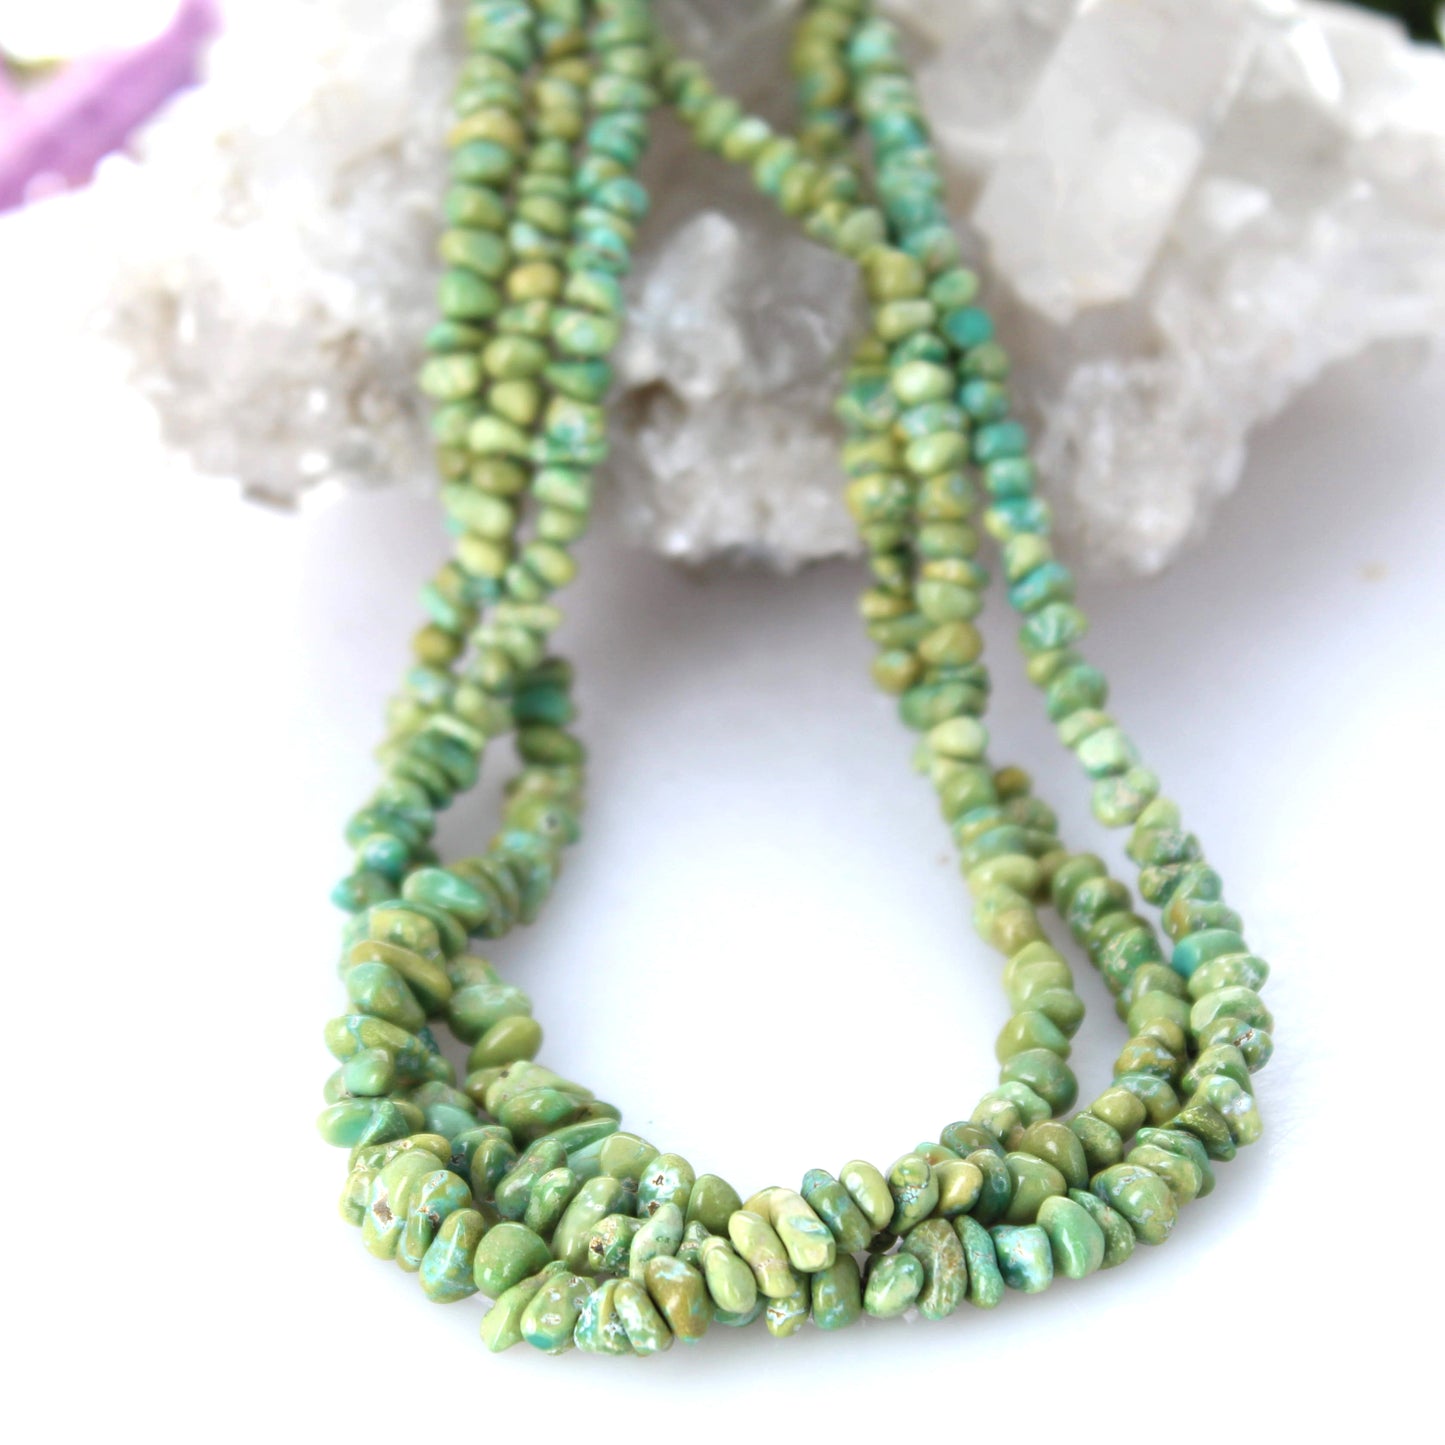 LONE MOUNTAIN TURQUOISE Beads Nuggets Green Blue